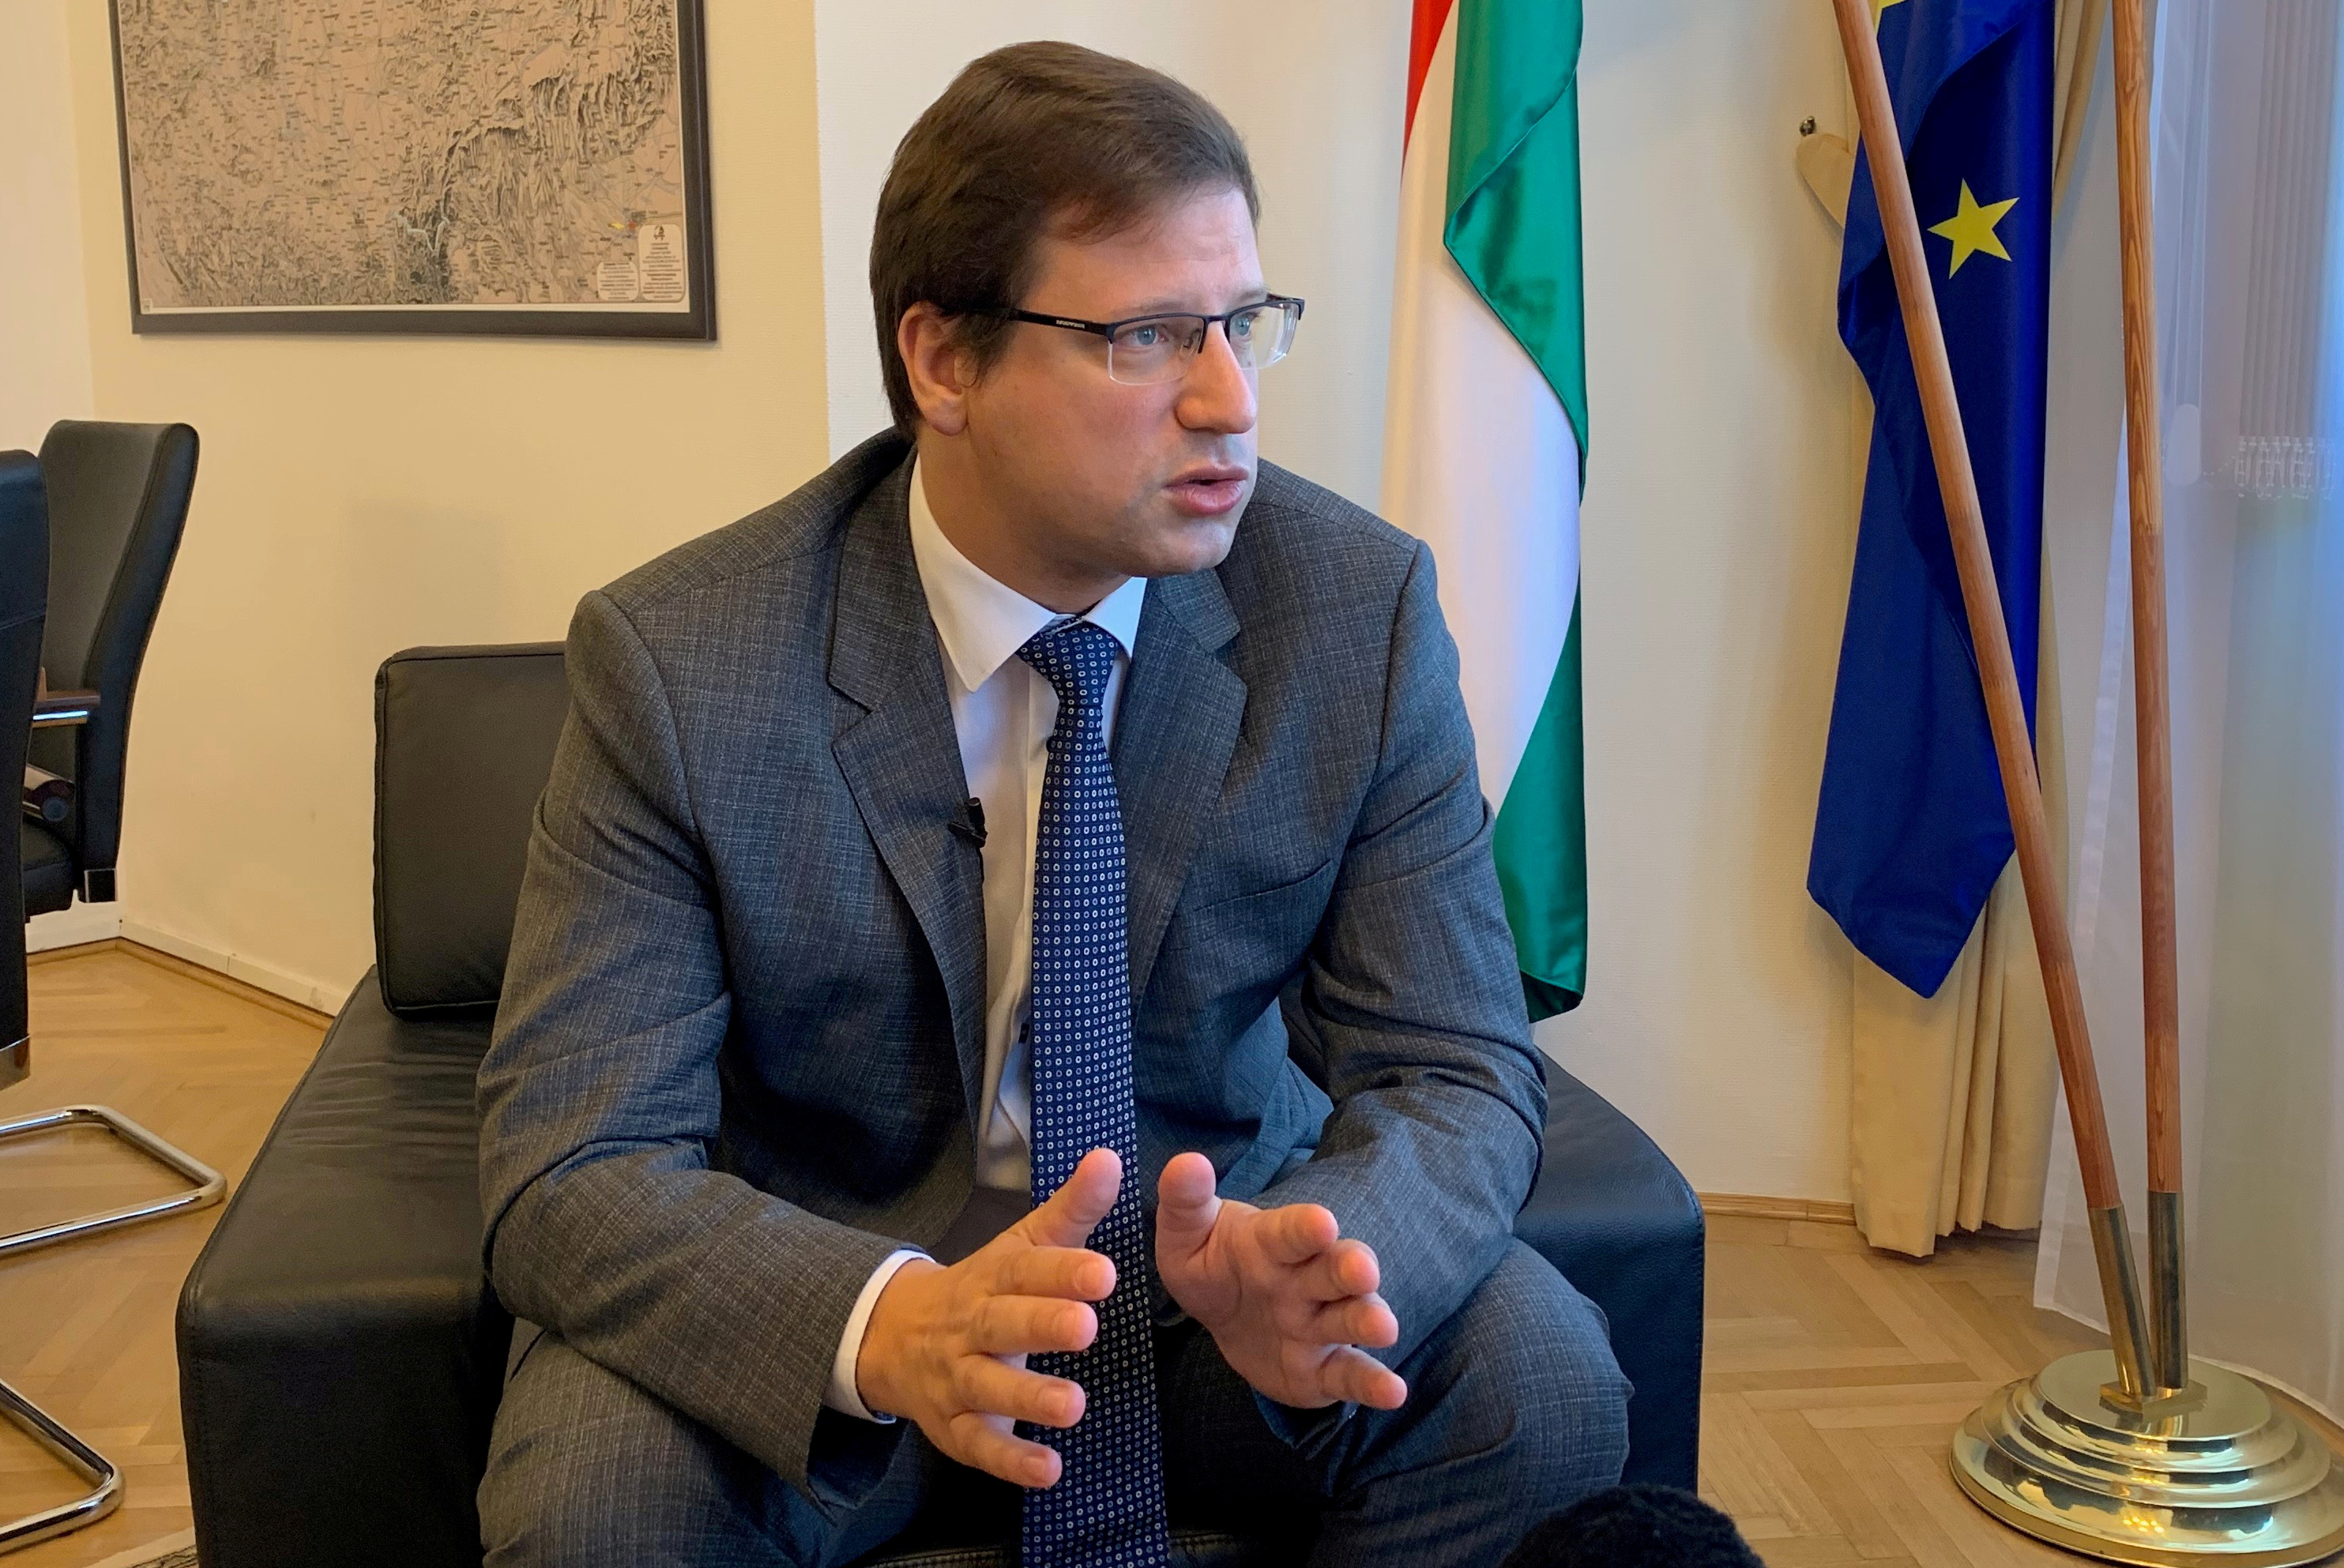 Gergely Gulyas, Hungarian Prime Minister Viktor Orban’s chief of staff speaks during an interview in his office in Budapest